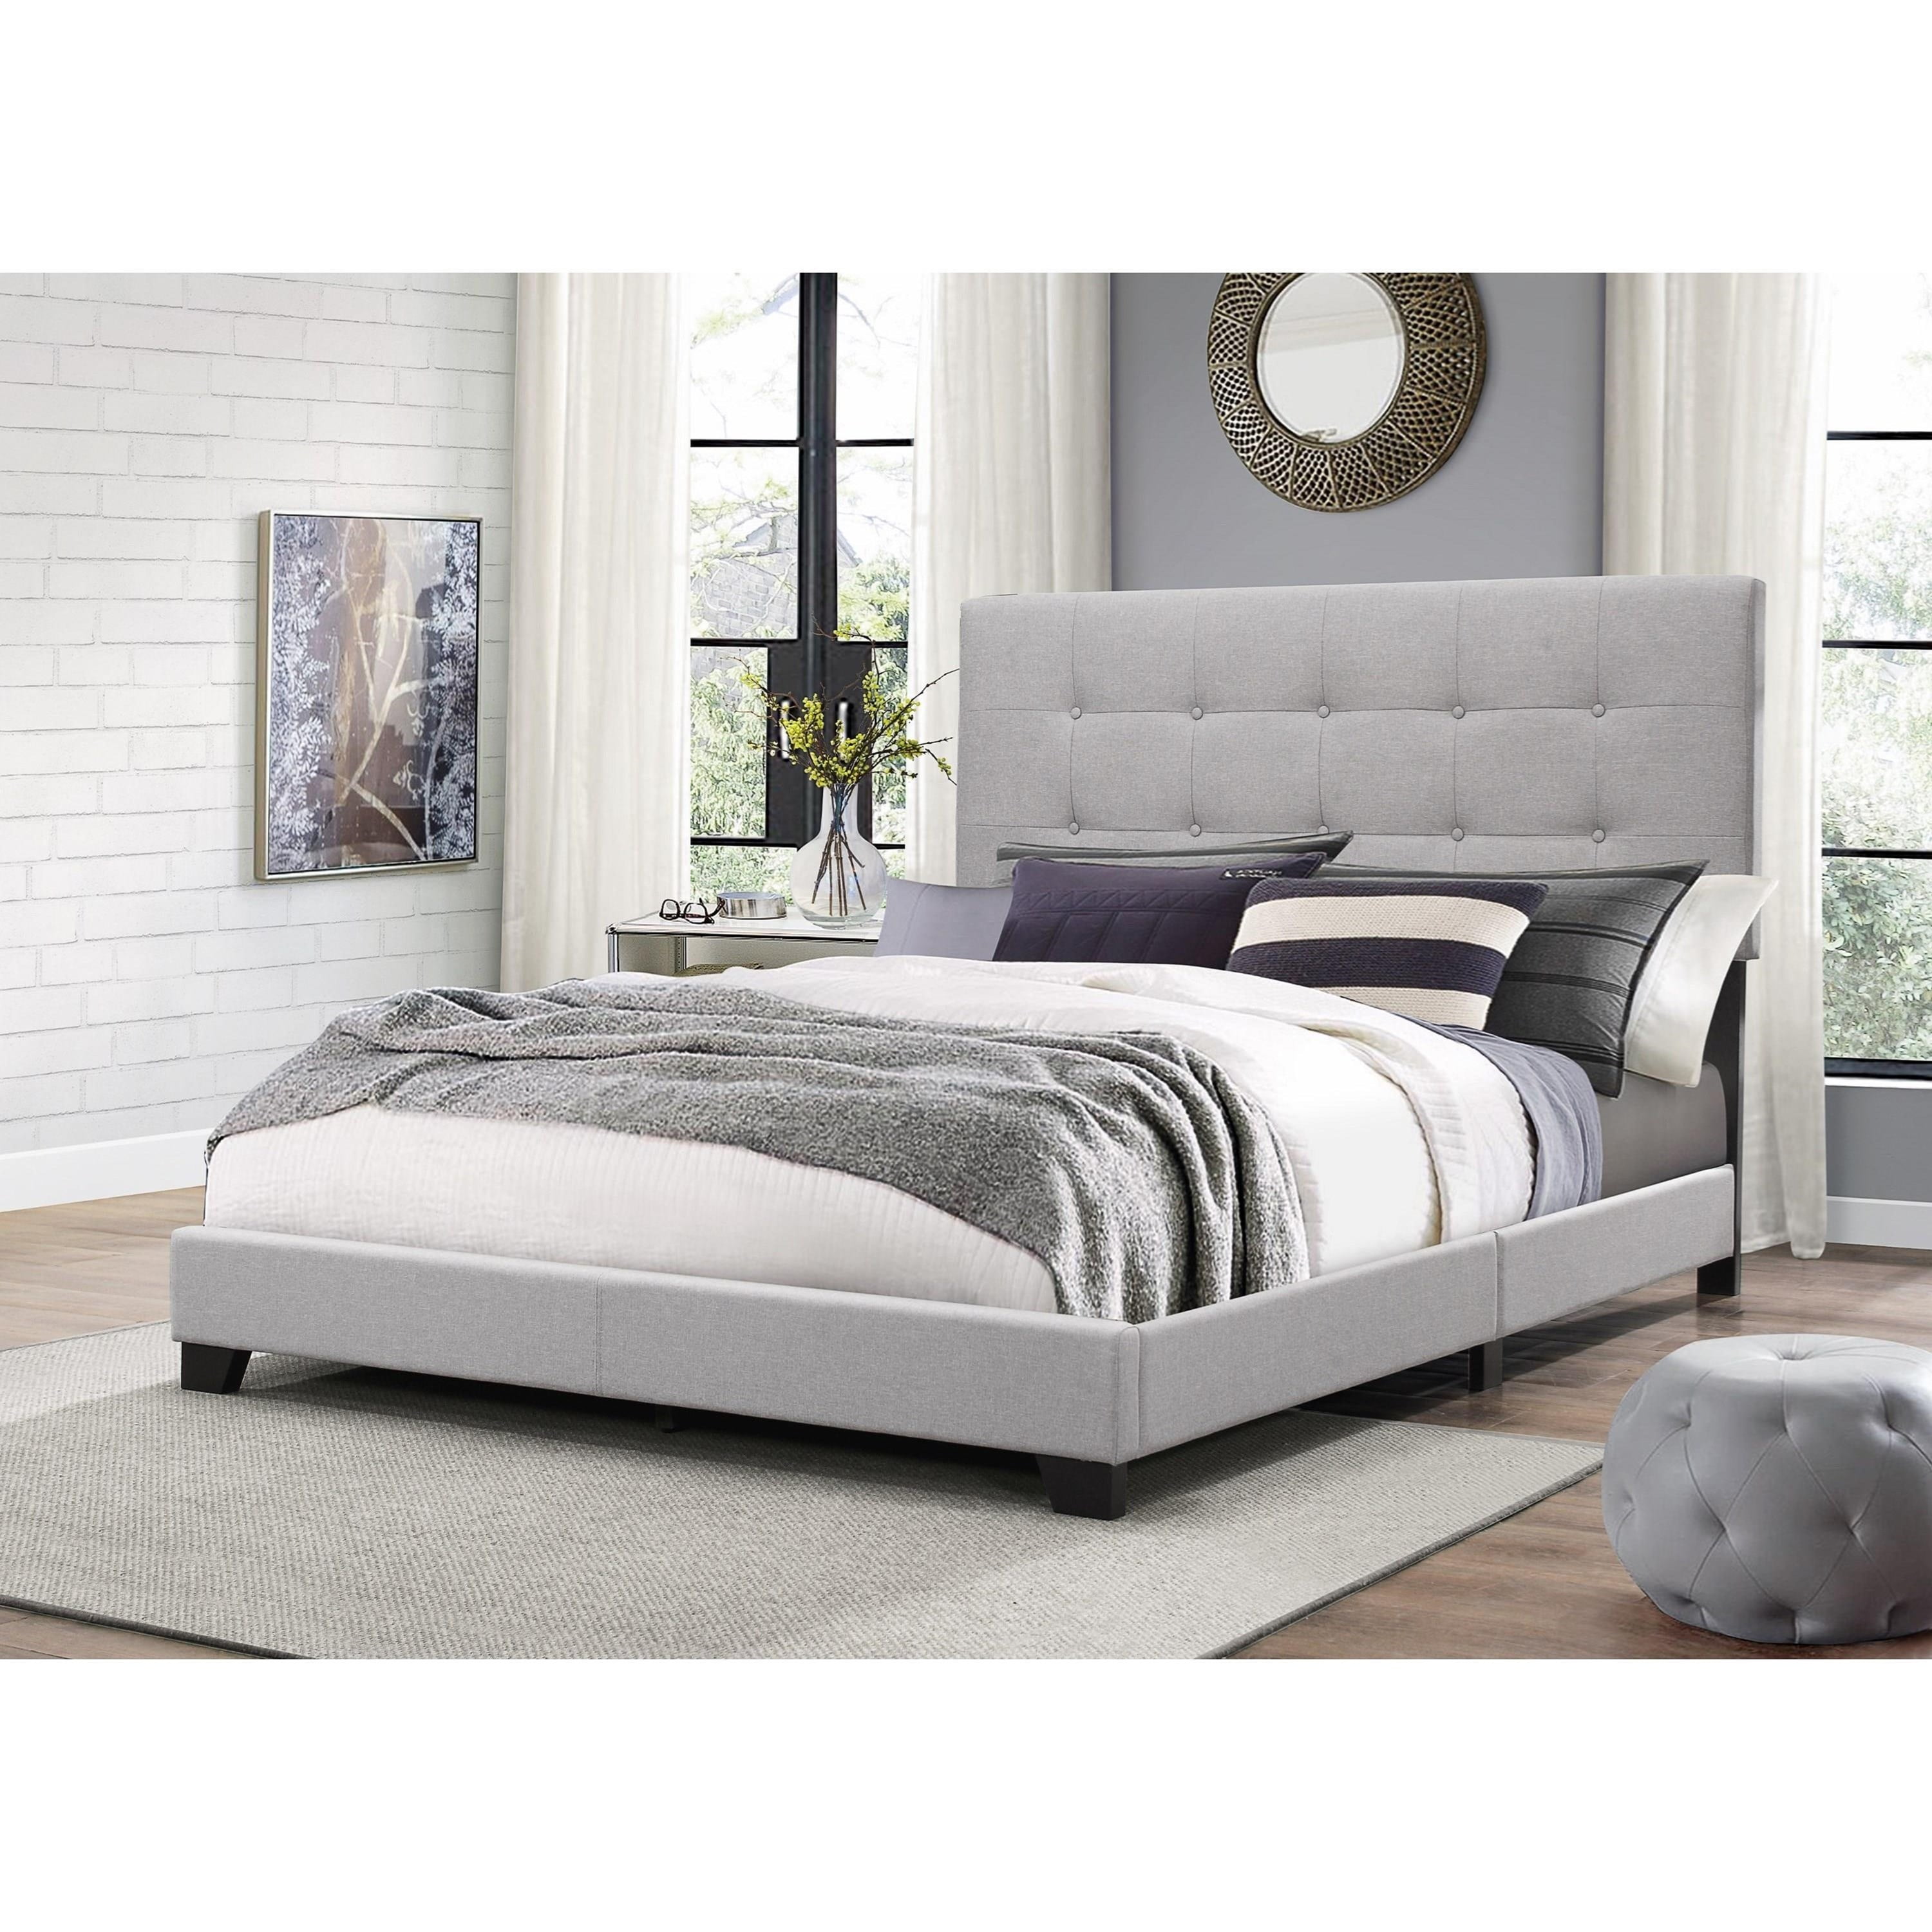 Transitional 1pc Fabric Upholstered, King Size Bed With Upholstered Headboard